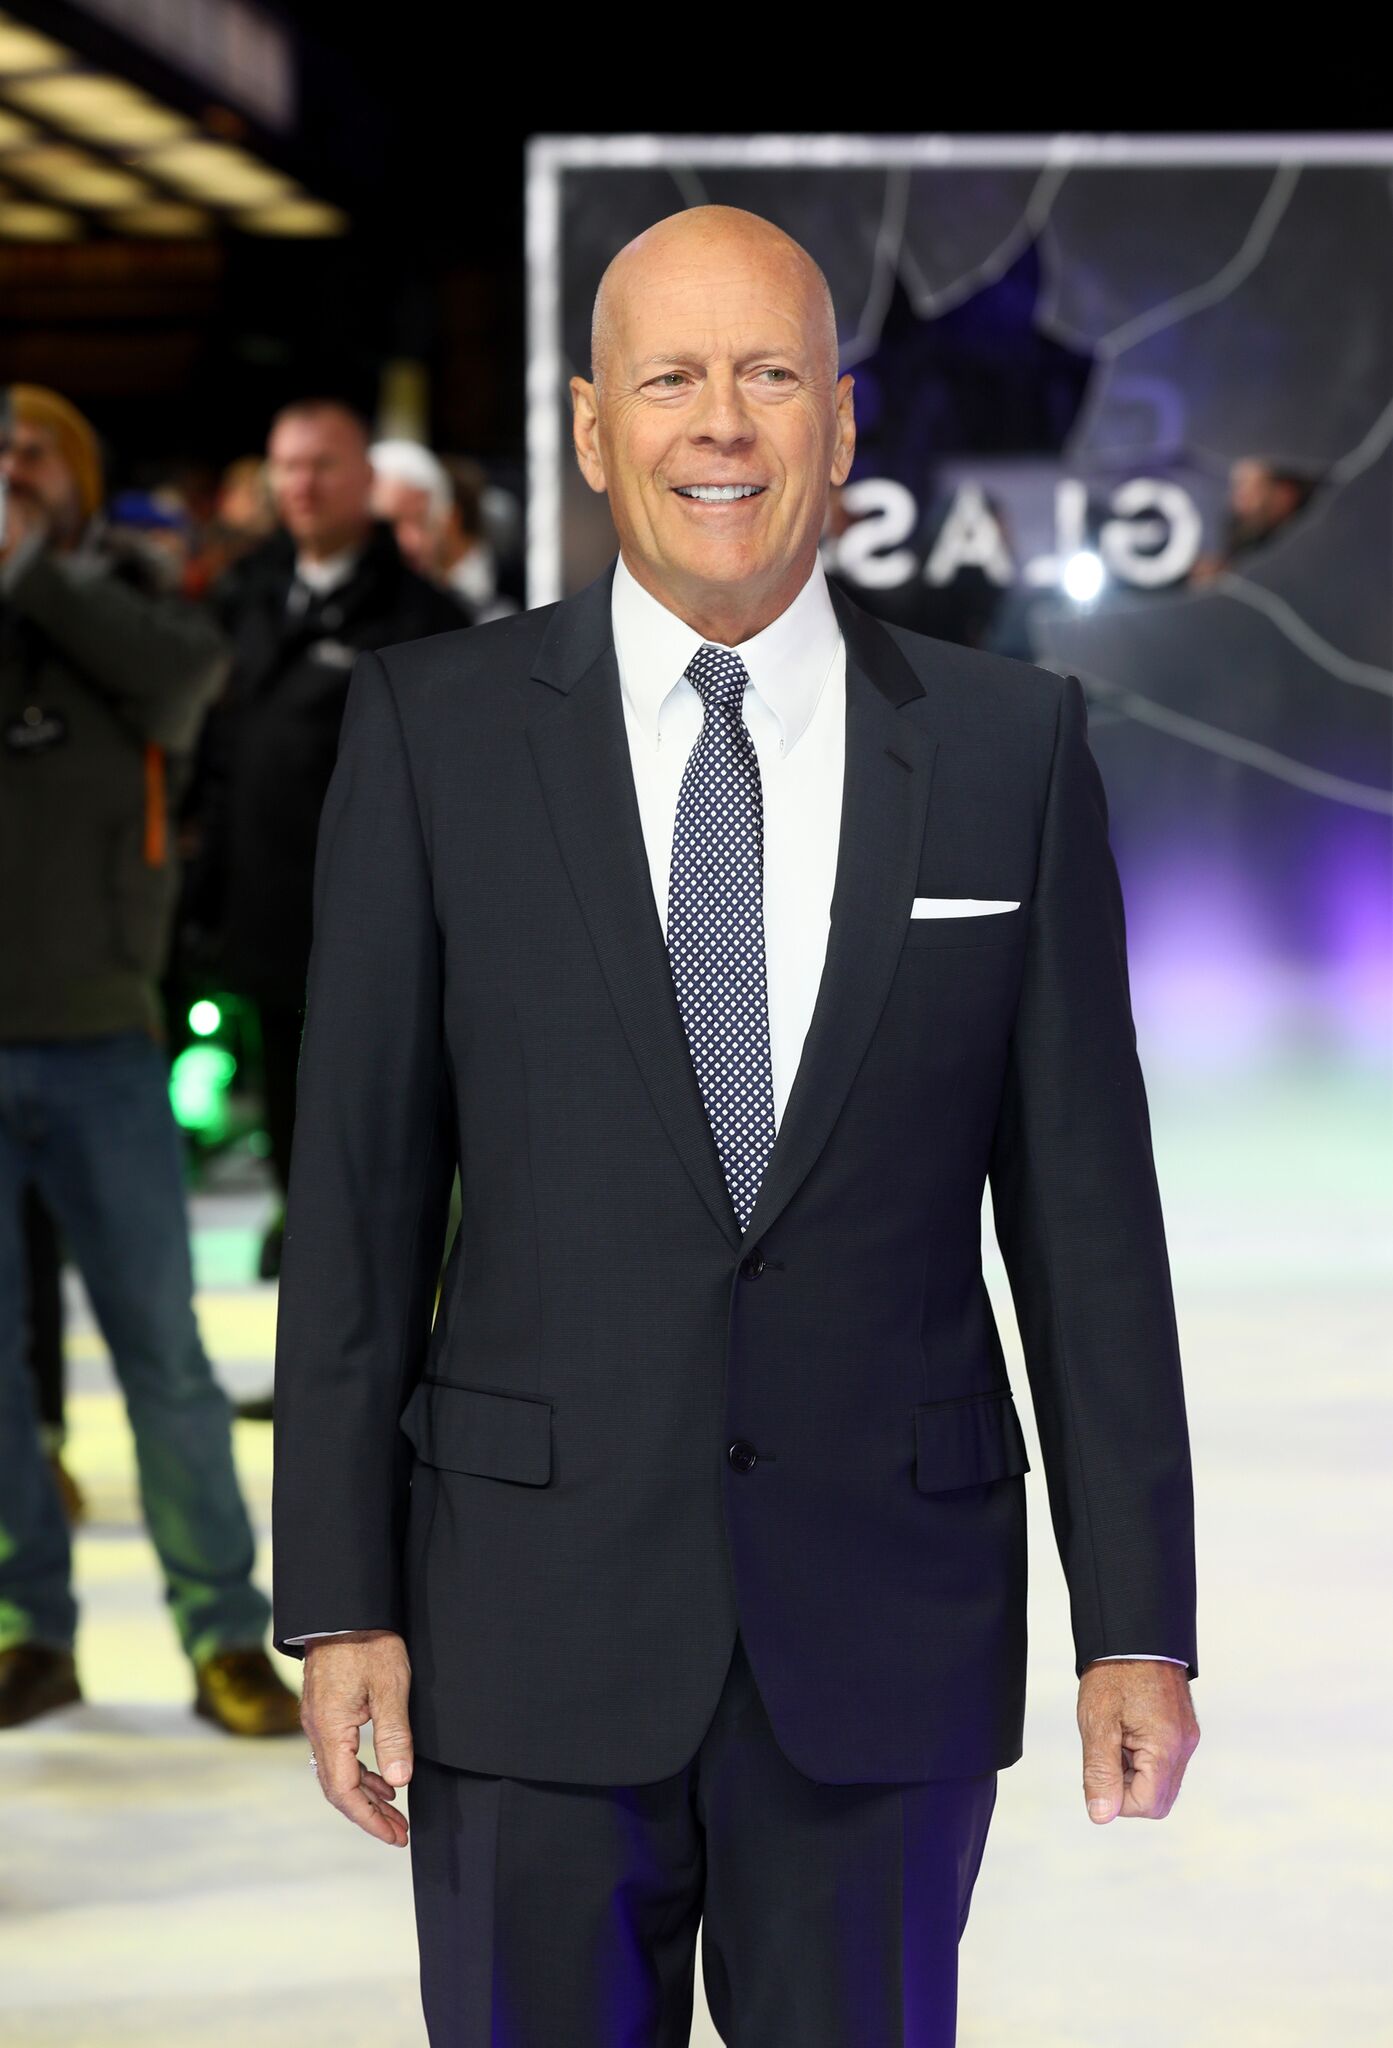 Bruce Willis attends the UK Premiere of M. Night Shyamalan's all-new comic-book thriller "Glass" at Curzon Cinema Mayfair | Getty Images